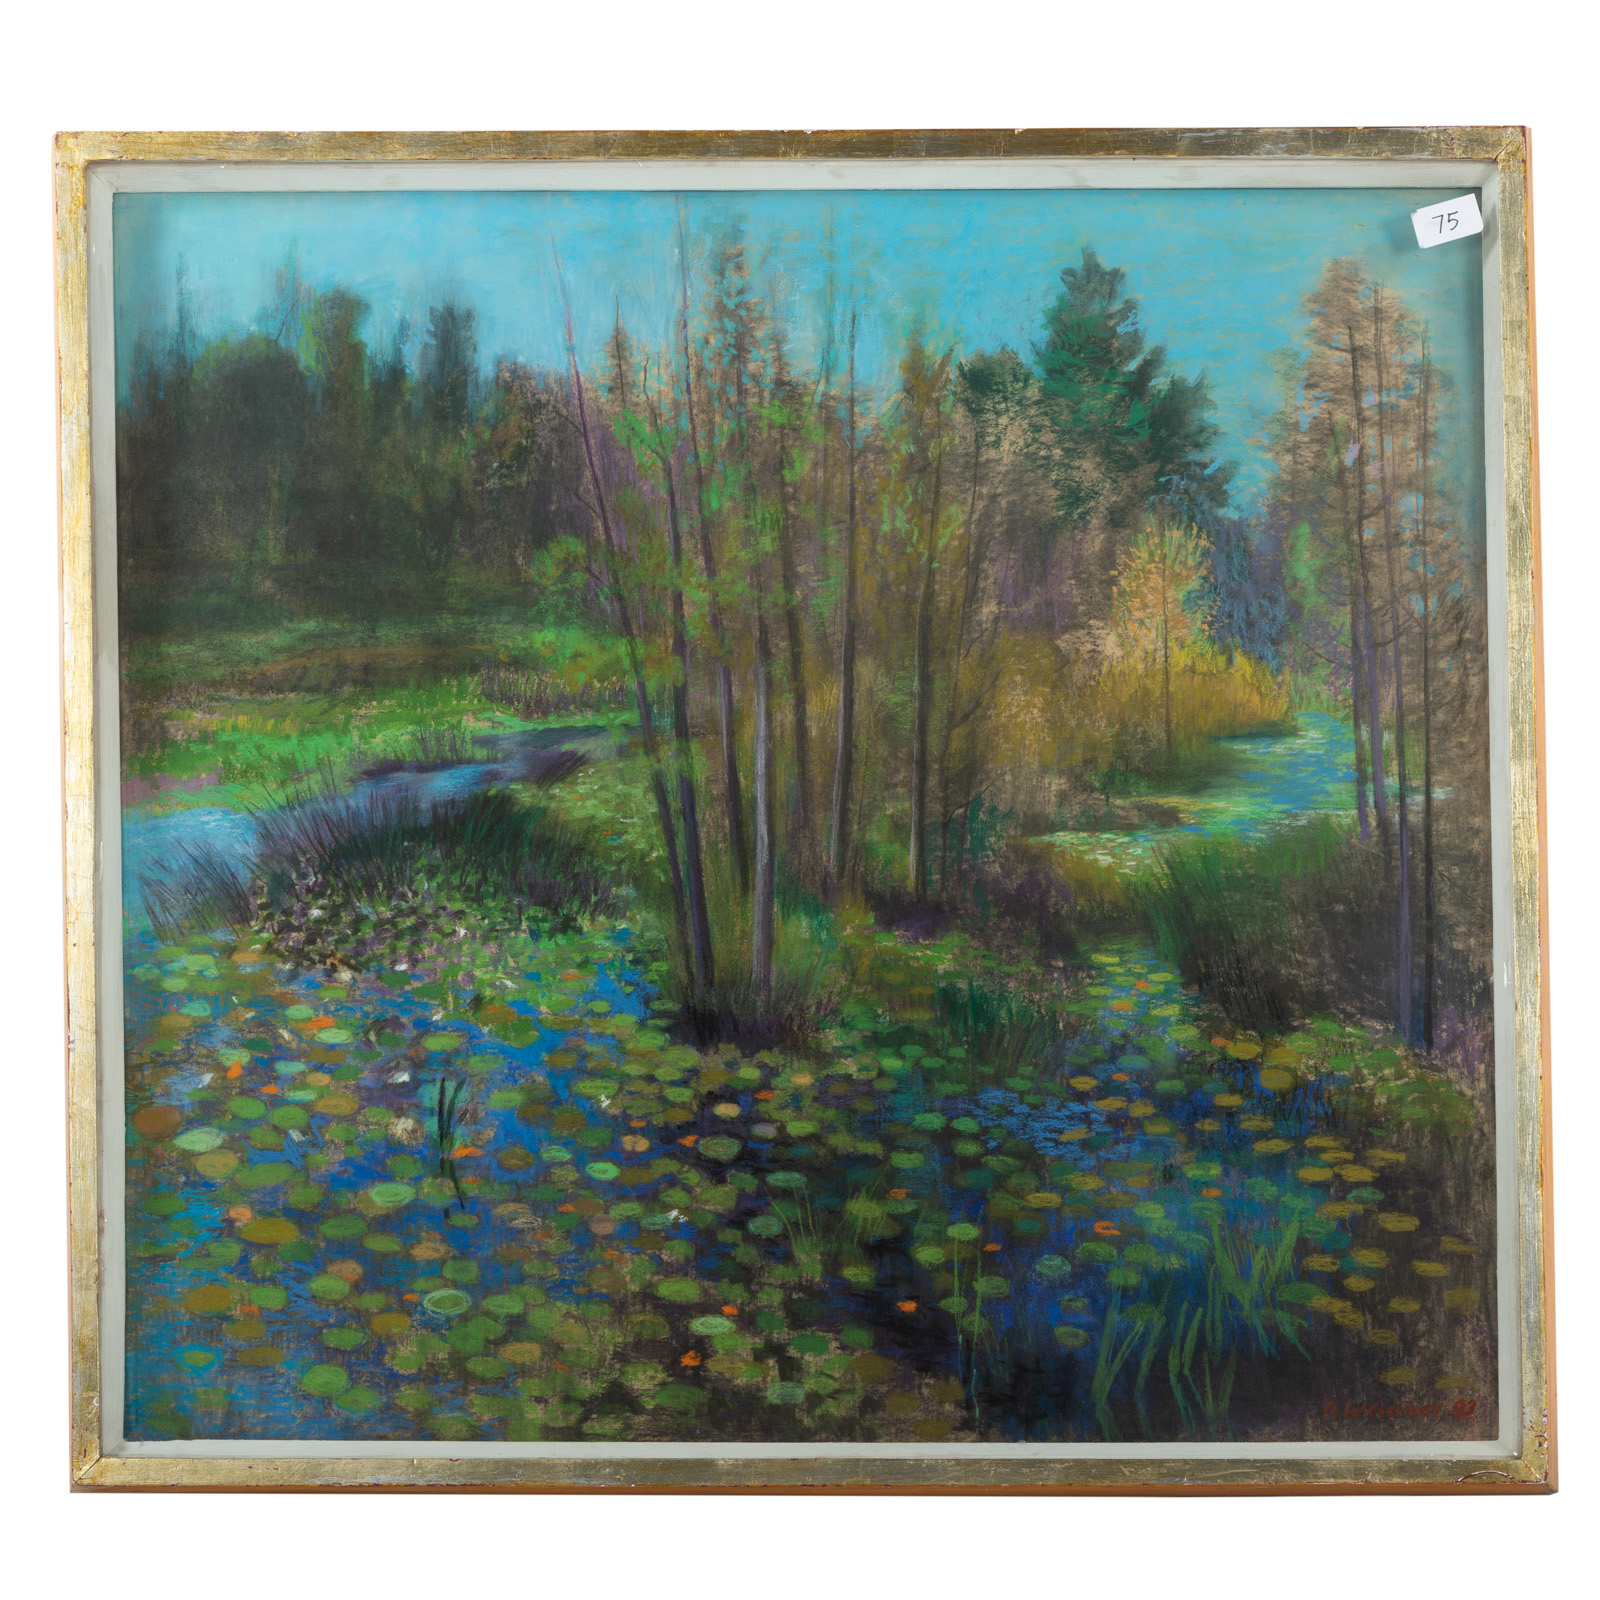 ROSWELL T. WEIDNER. "WATER LILLIES